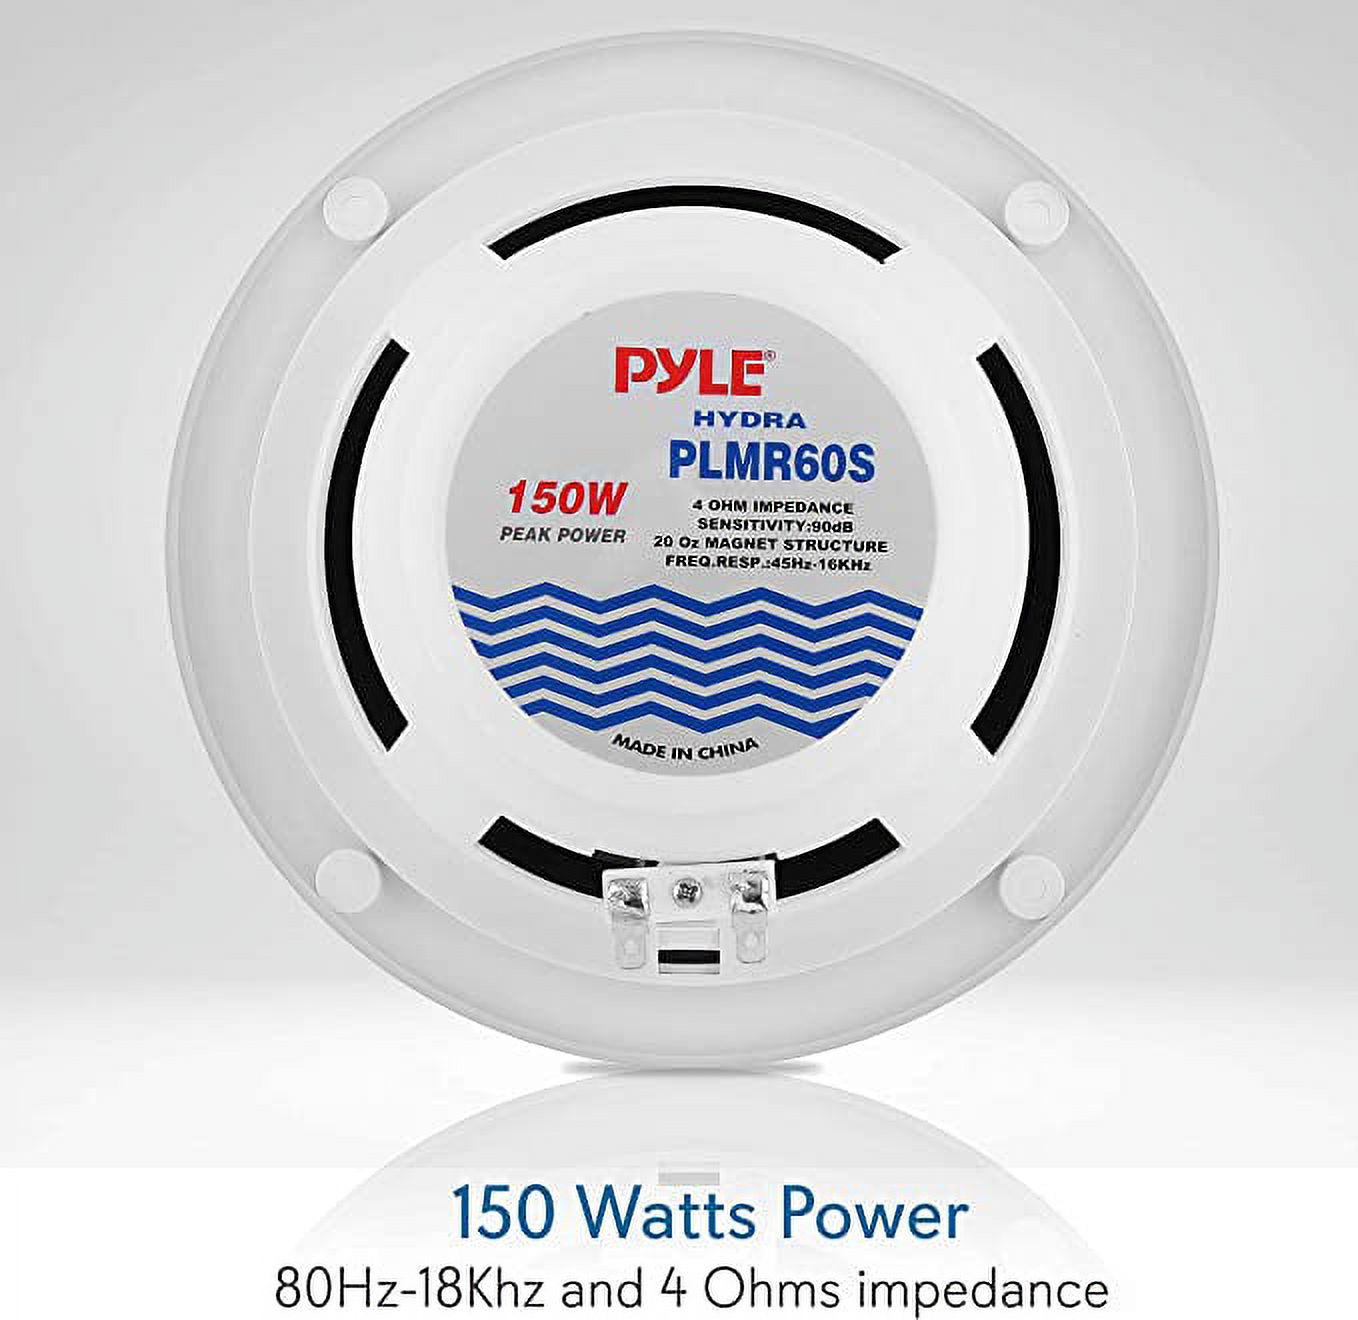 Pyle 6.5” Dual Marine Speaker 2Way Waterproof & Weather Resistant Outdoor Audio Stereo Sound System - image 2 of 7